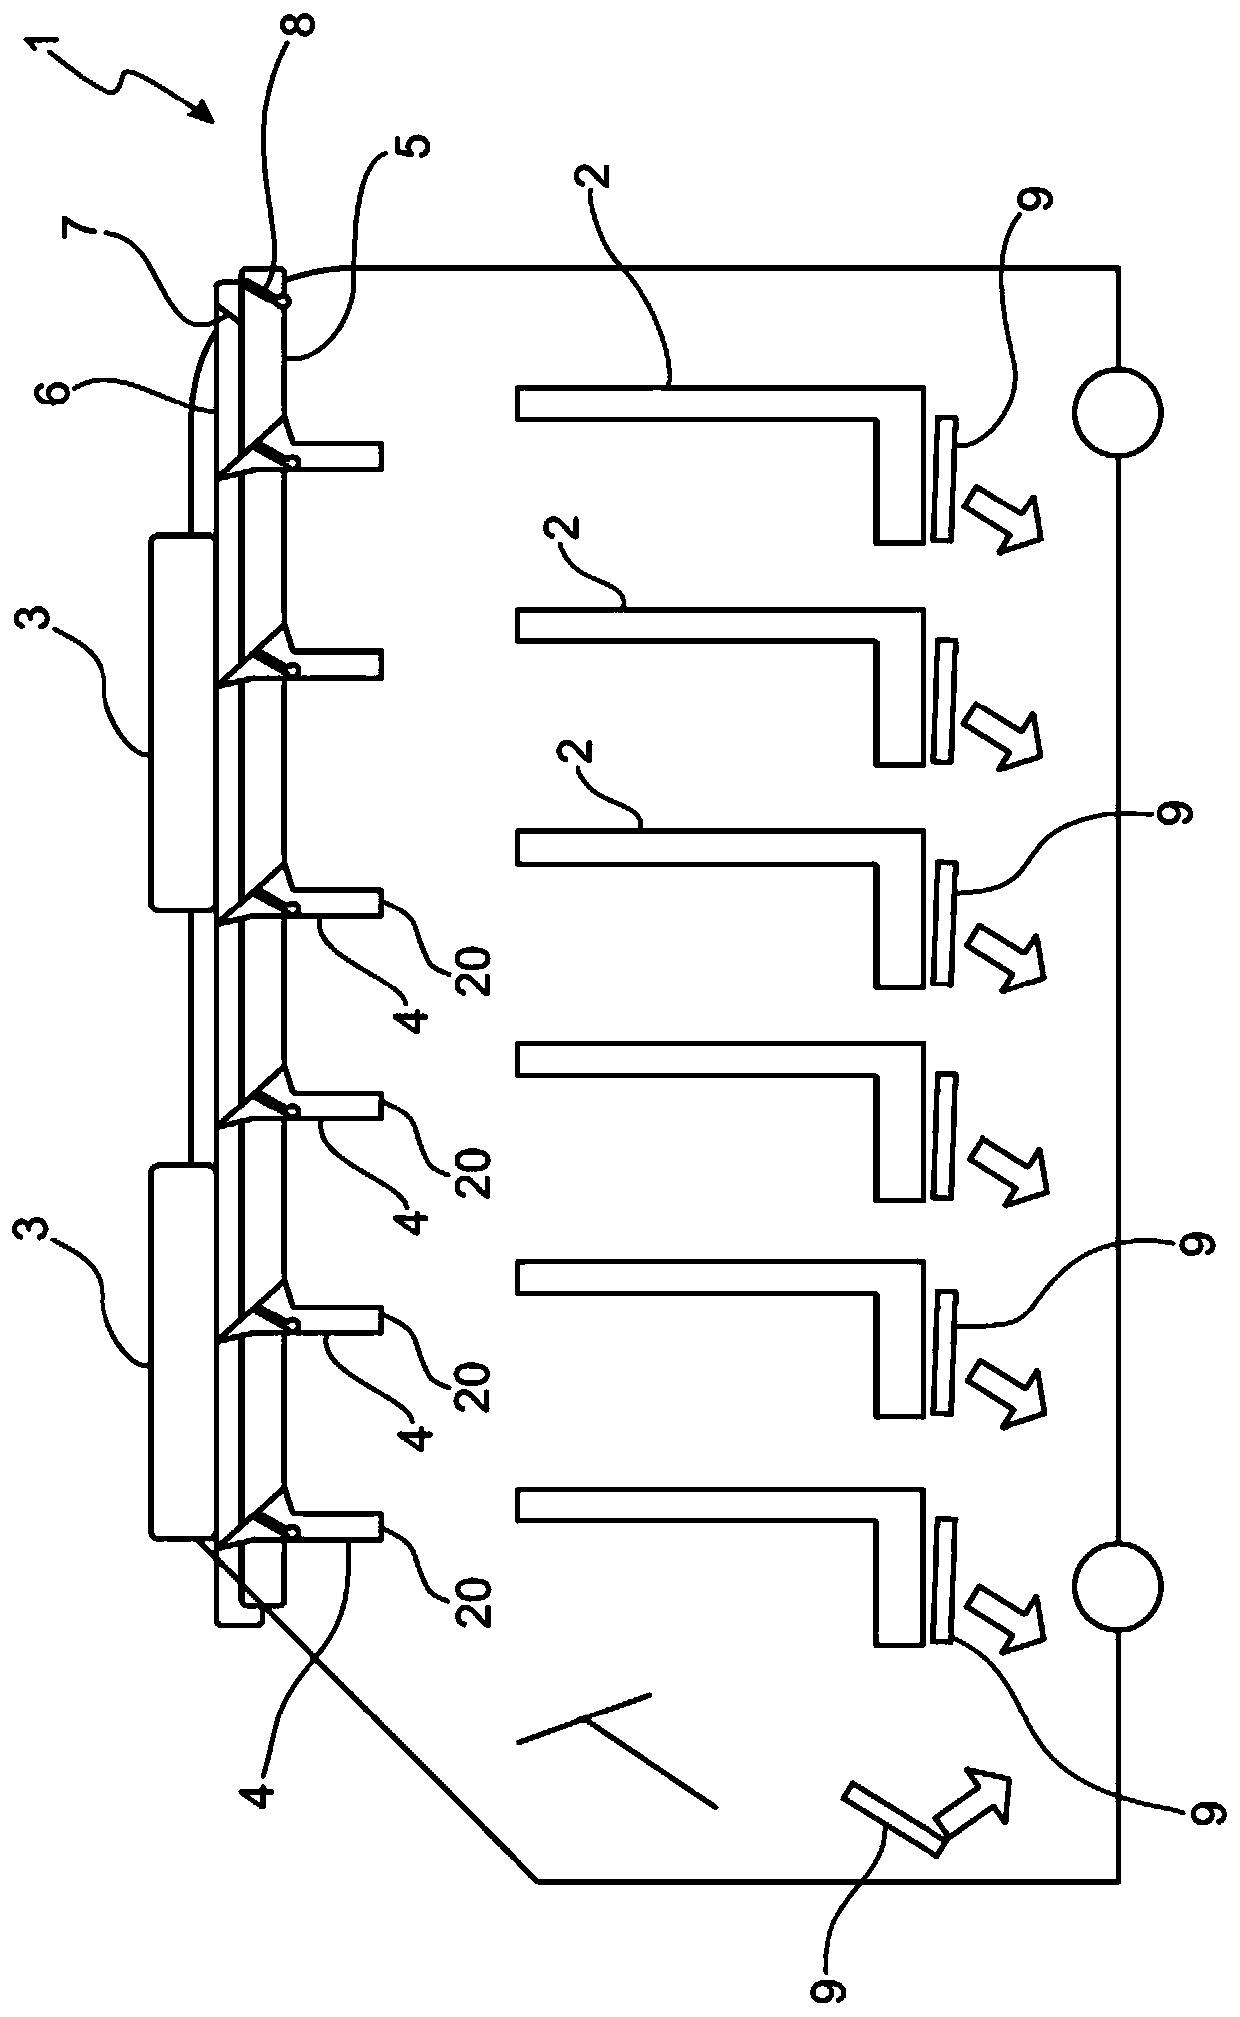 Multi-zone air conditioning system for vehicles